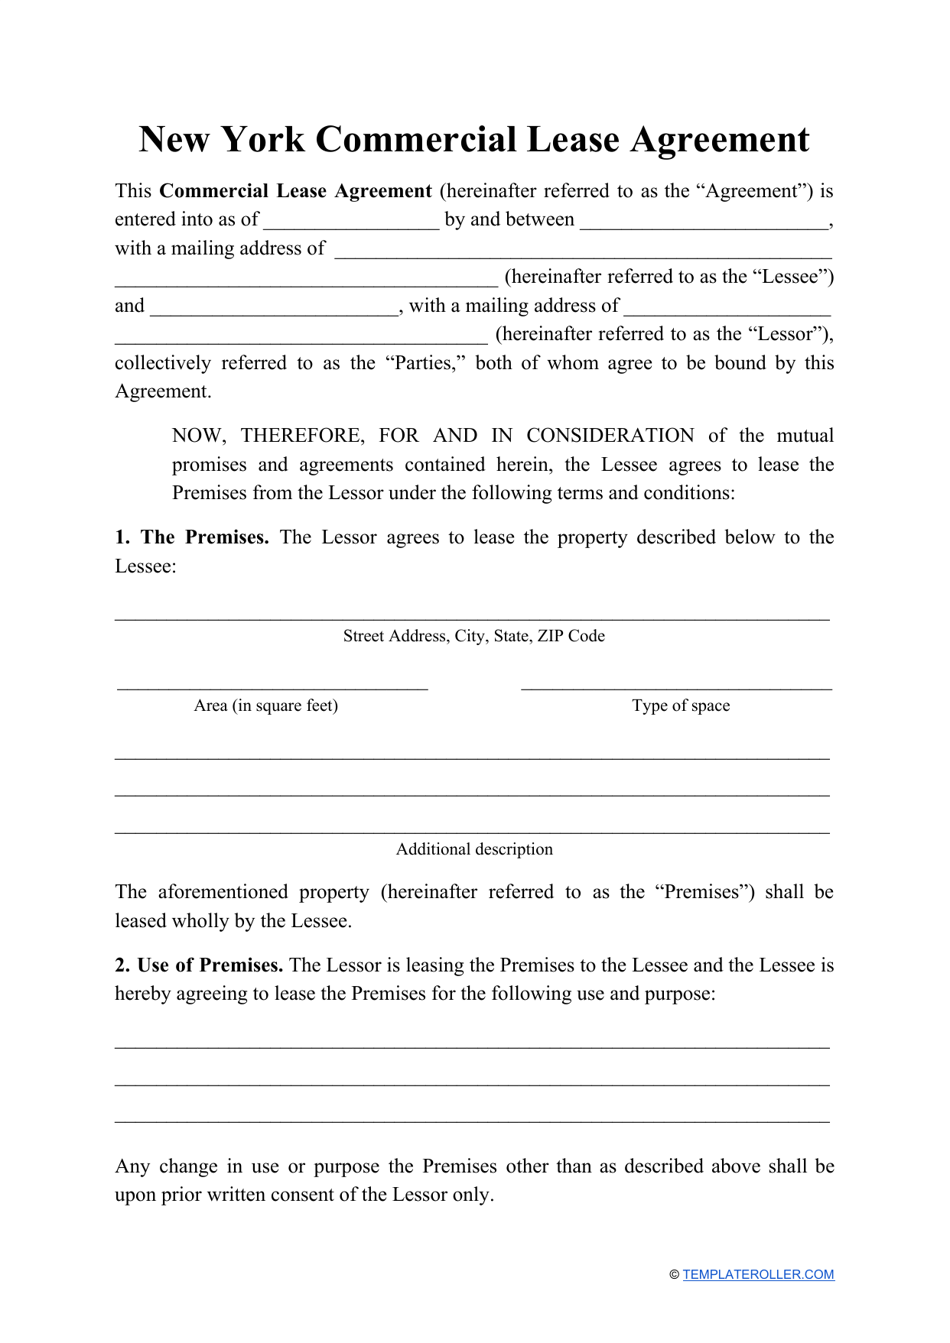 new york commercial lease agreement template download printable pdf templateroller